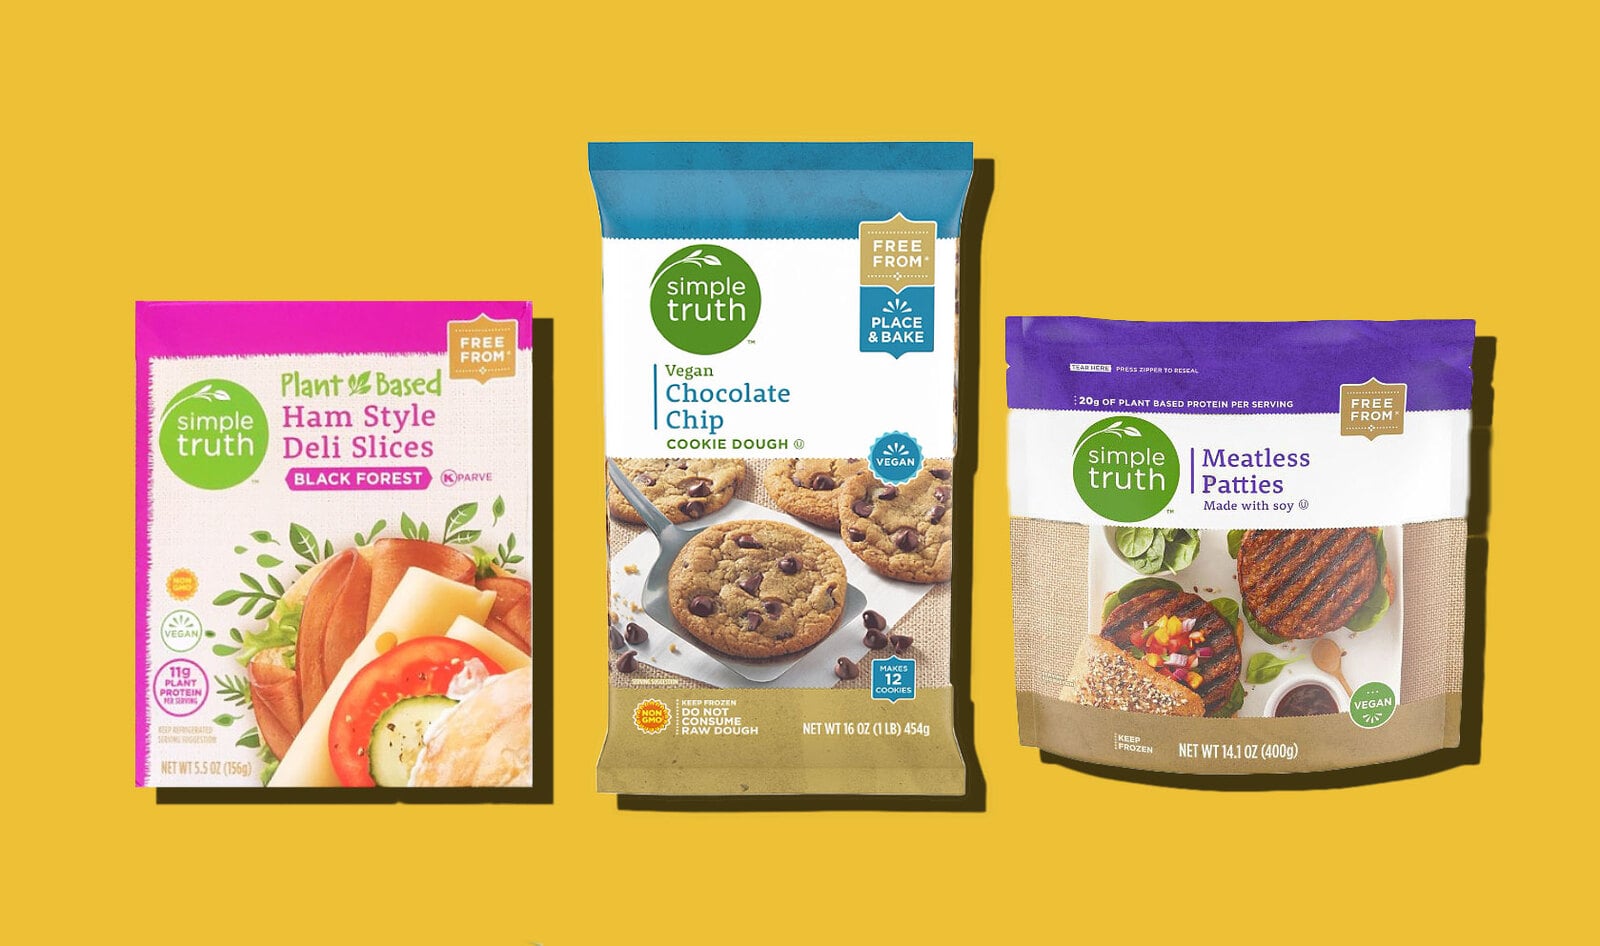 Kroger to Launch Its Own Vegan Burger Patties and Black Forest Ham